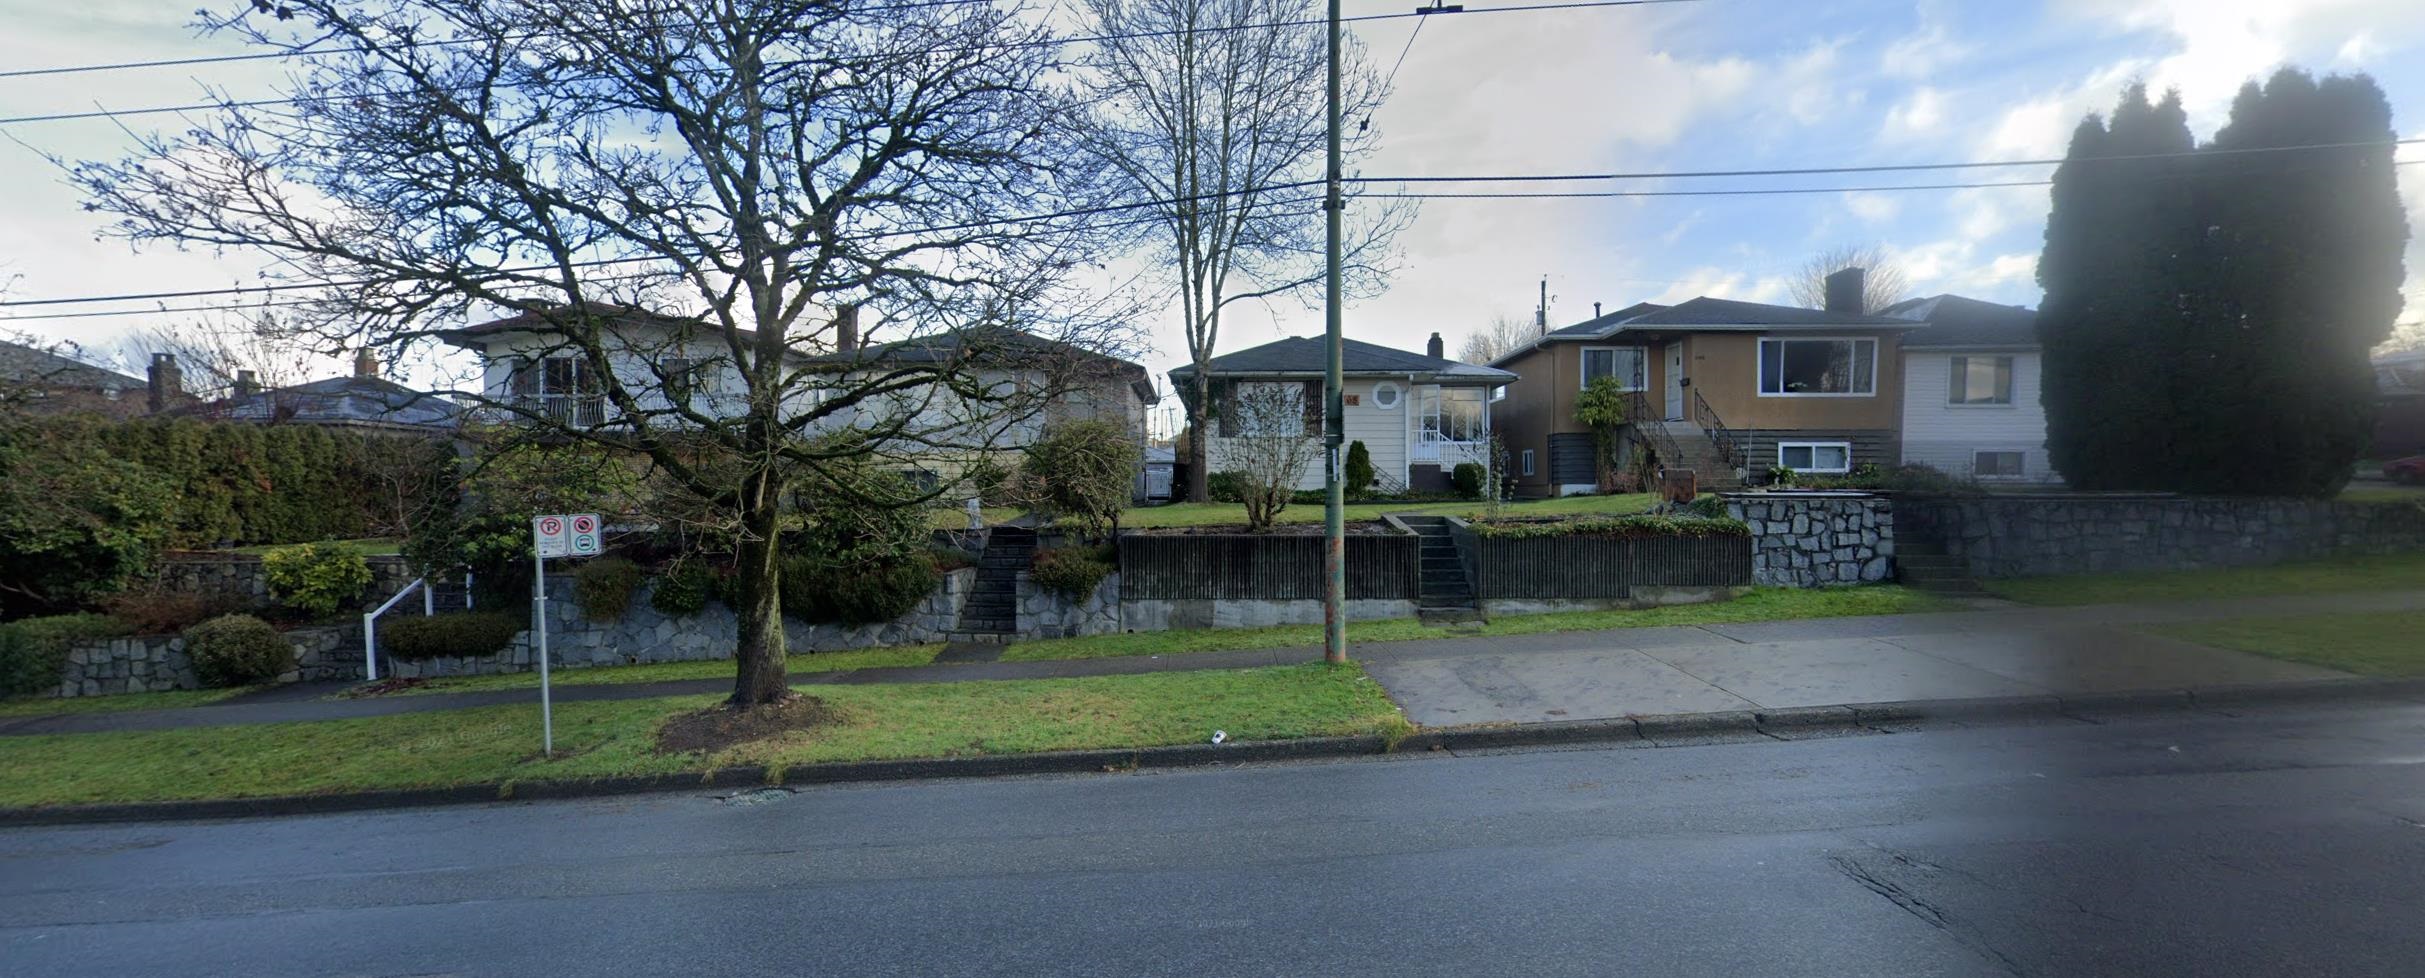 3120 RENFREW STREET, Vancouver, British Columbia, ,Land Commercial,For Lease,C8042663